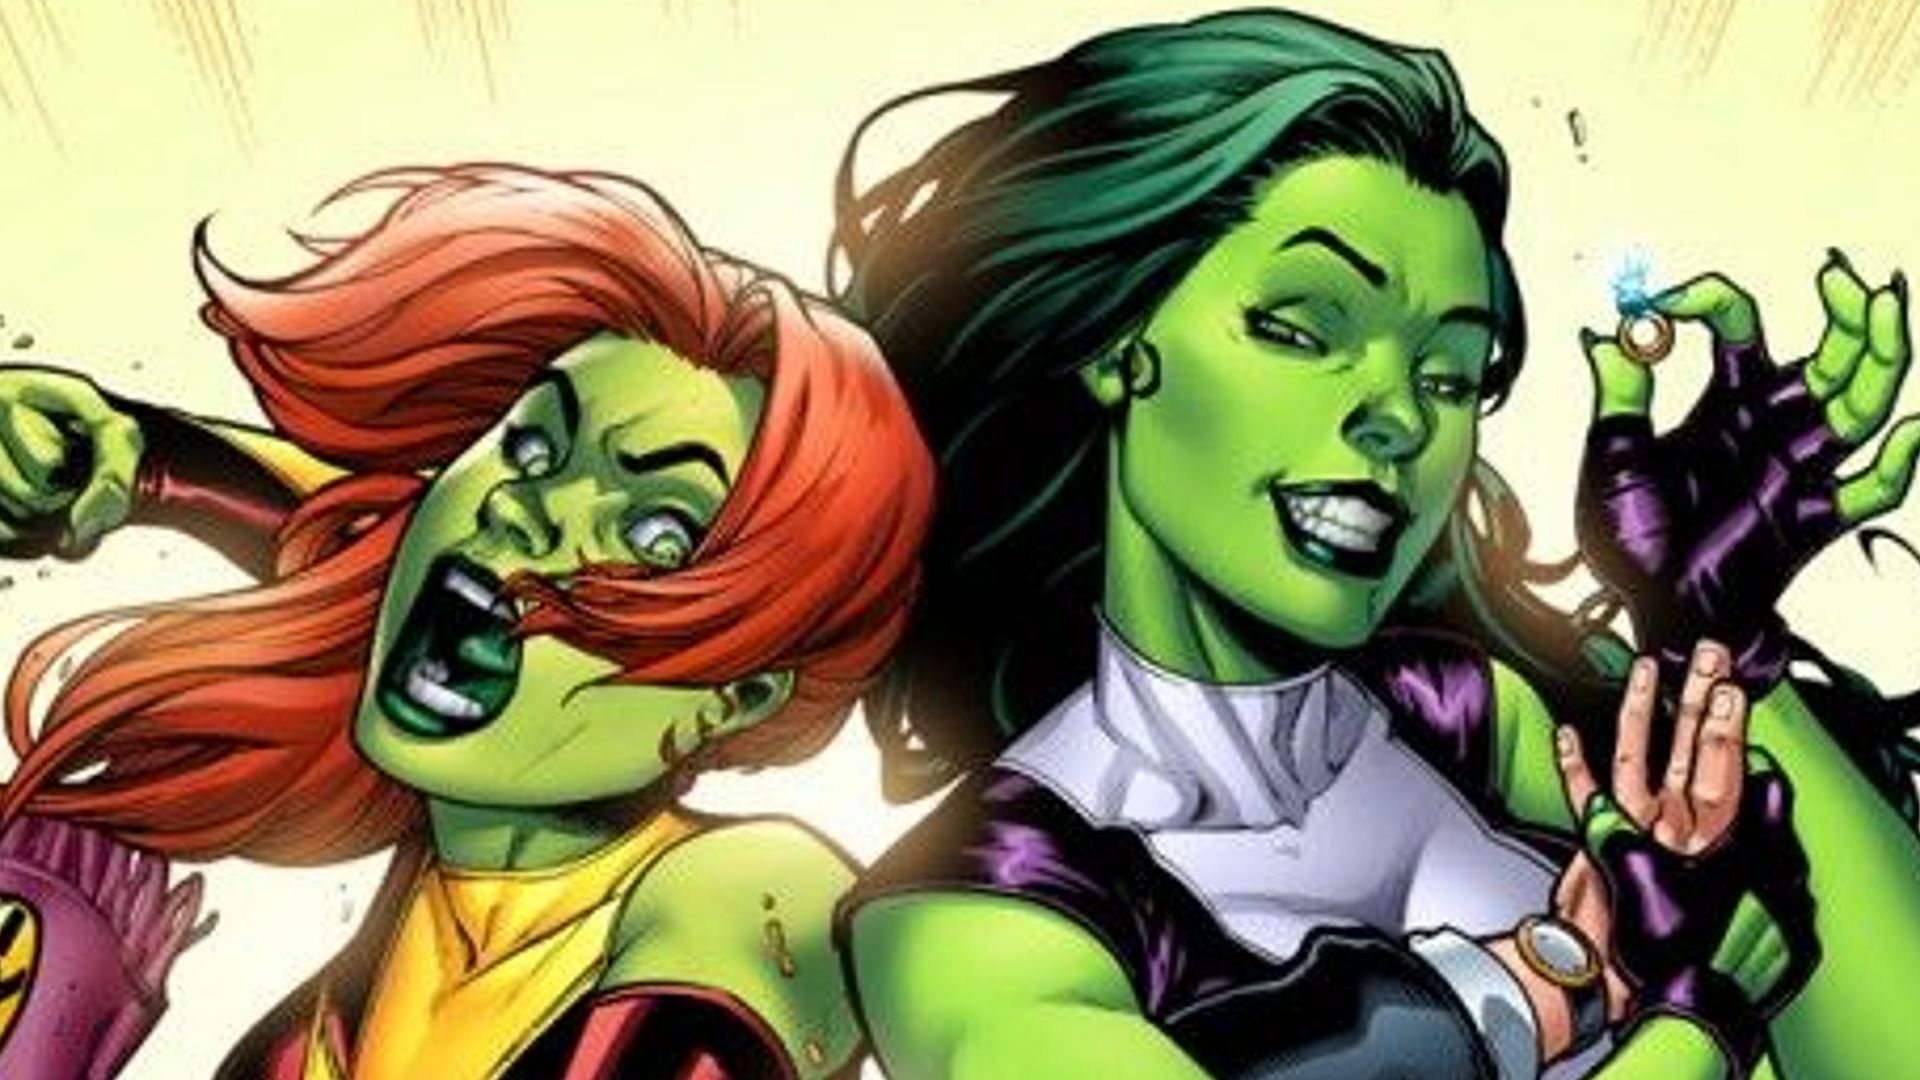 Double the strength and double the green (Image via Marvel Comics)